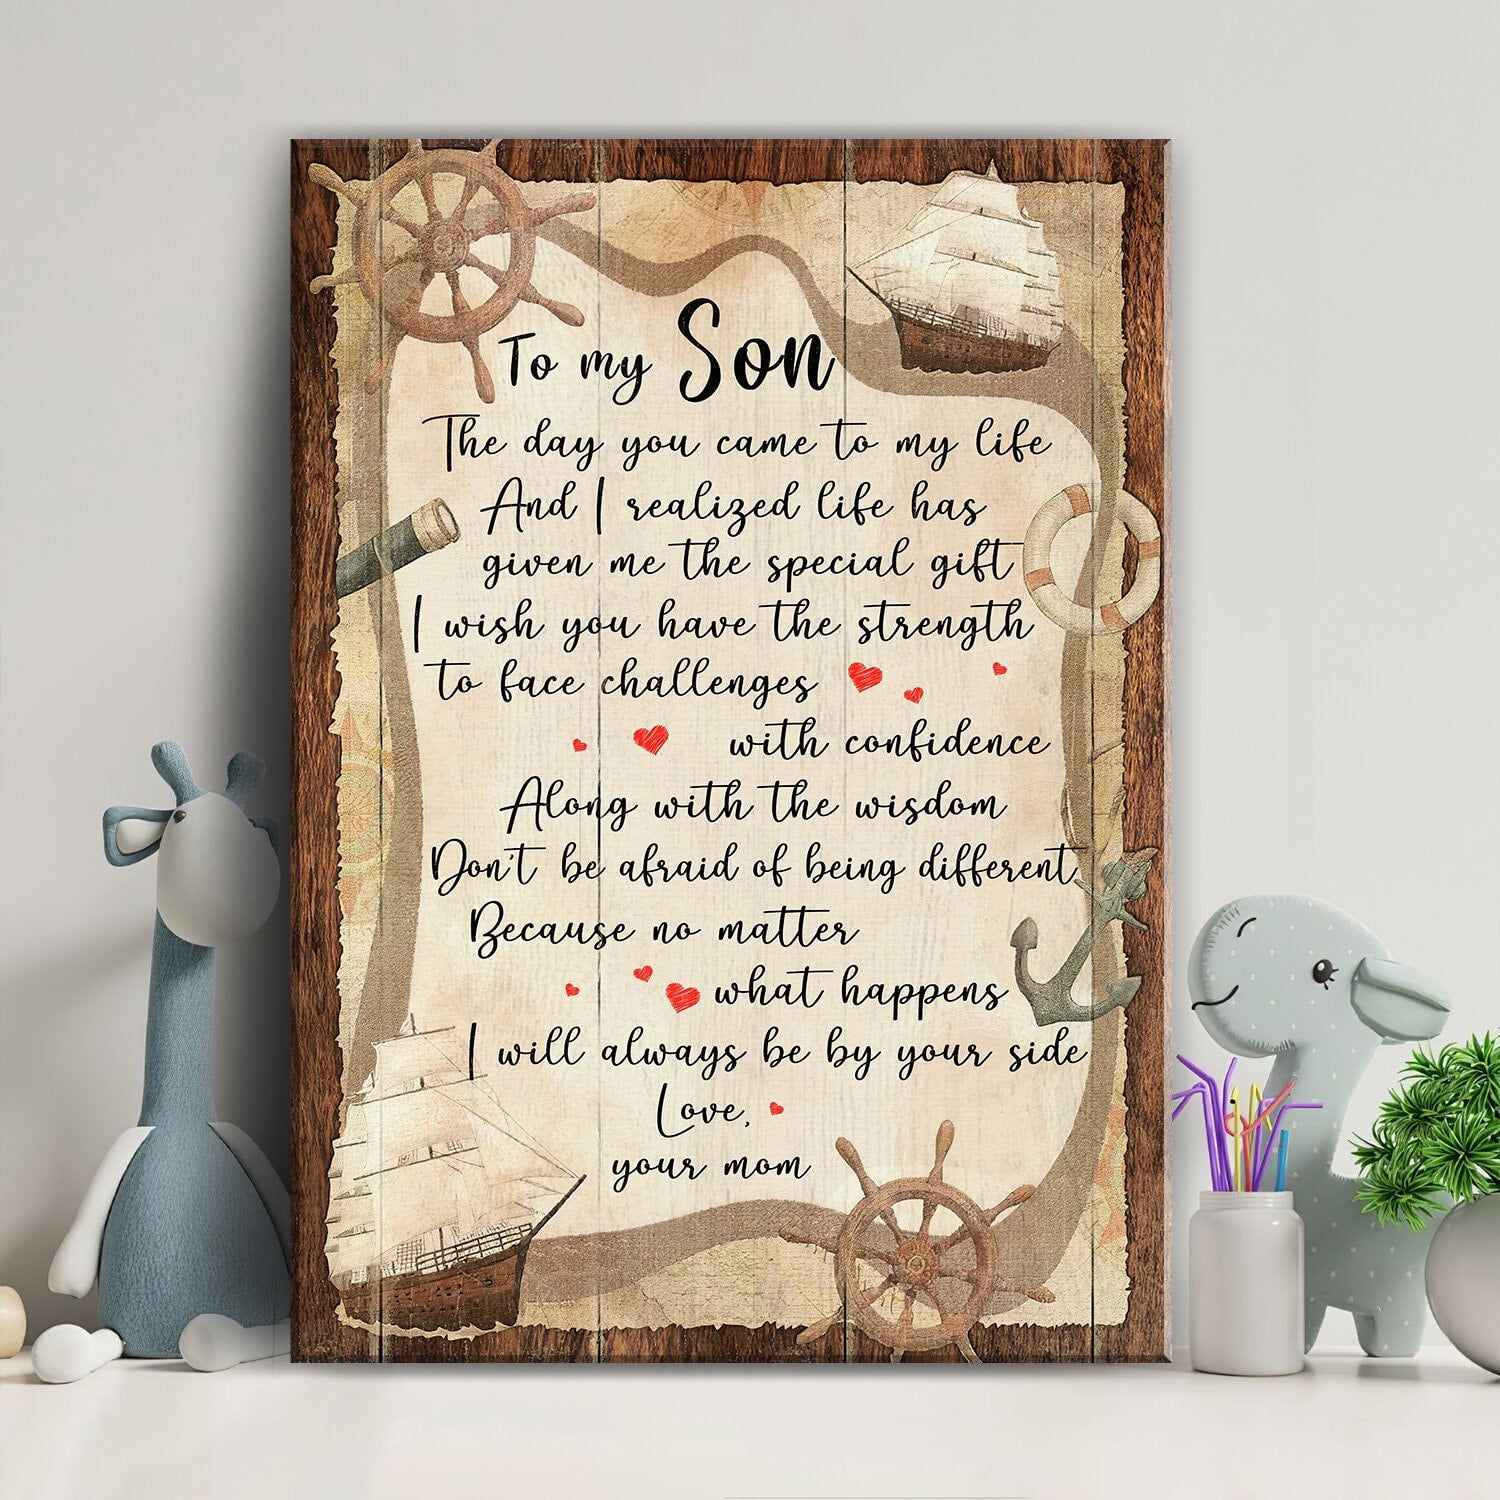 Mom to son, Letter, I will always be by your side - Family Portrait Canvas Prints, Wall Art